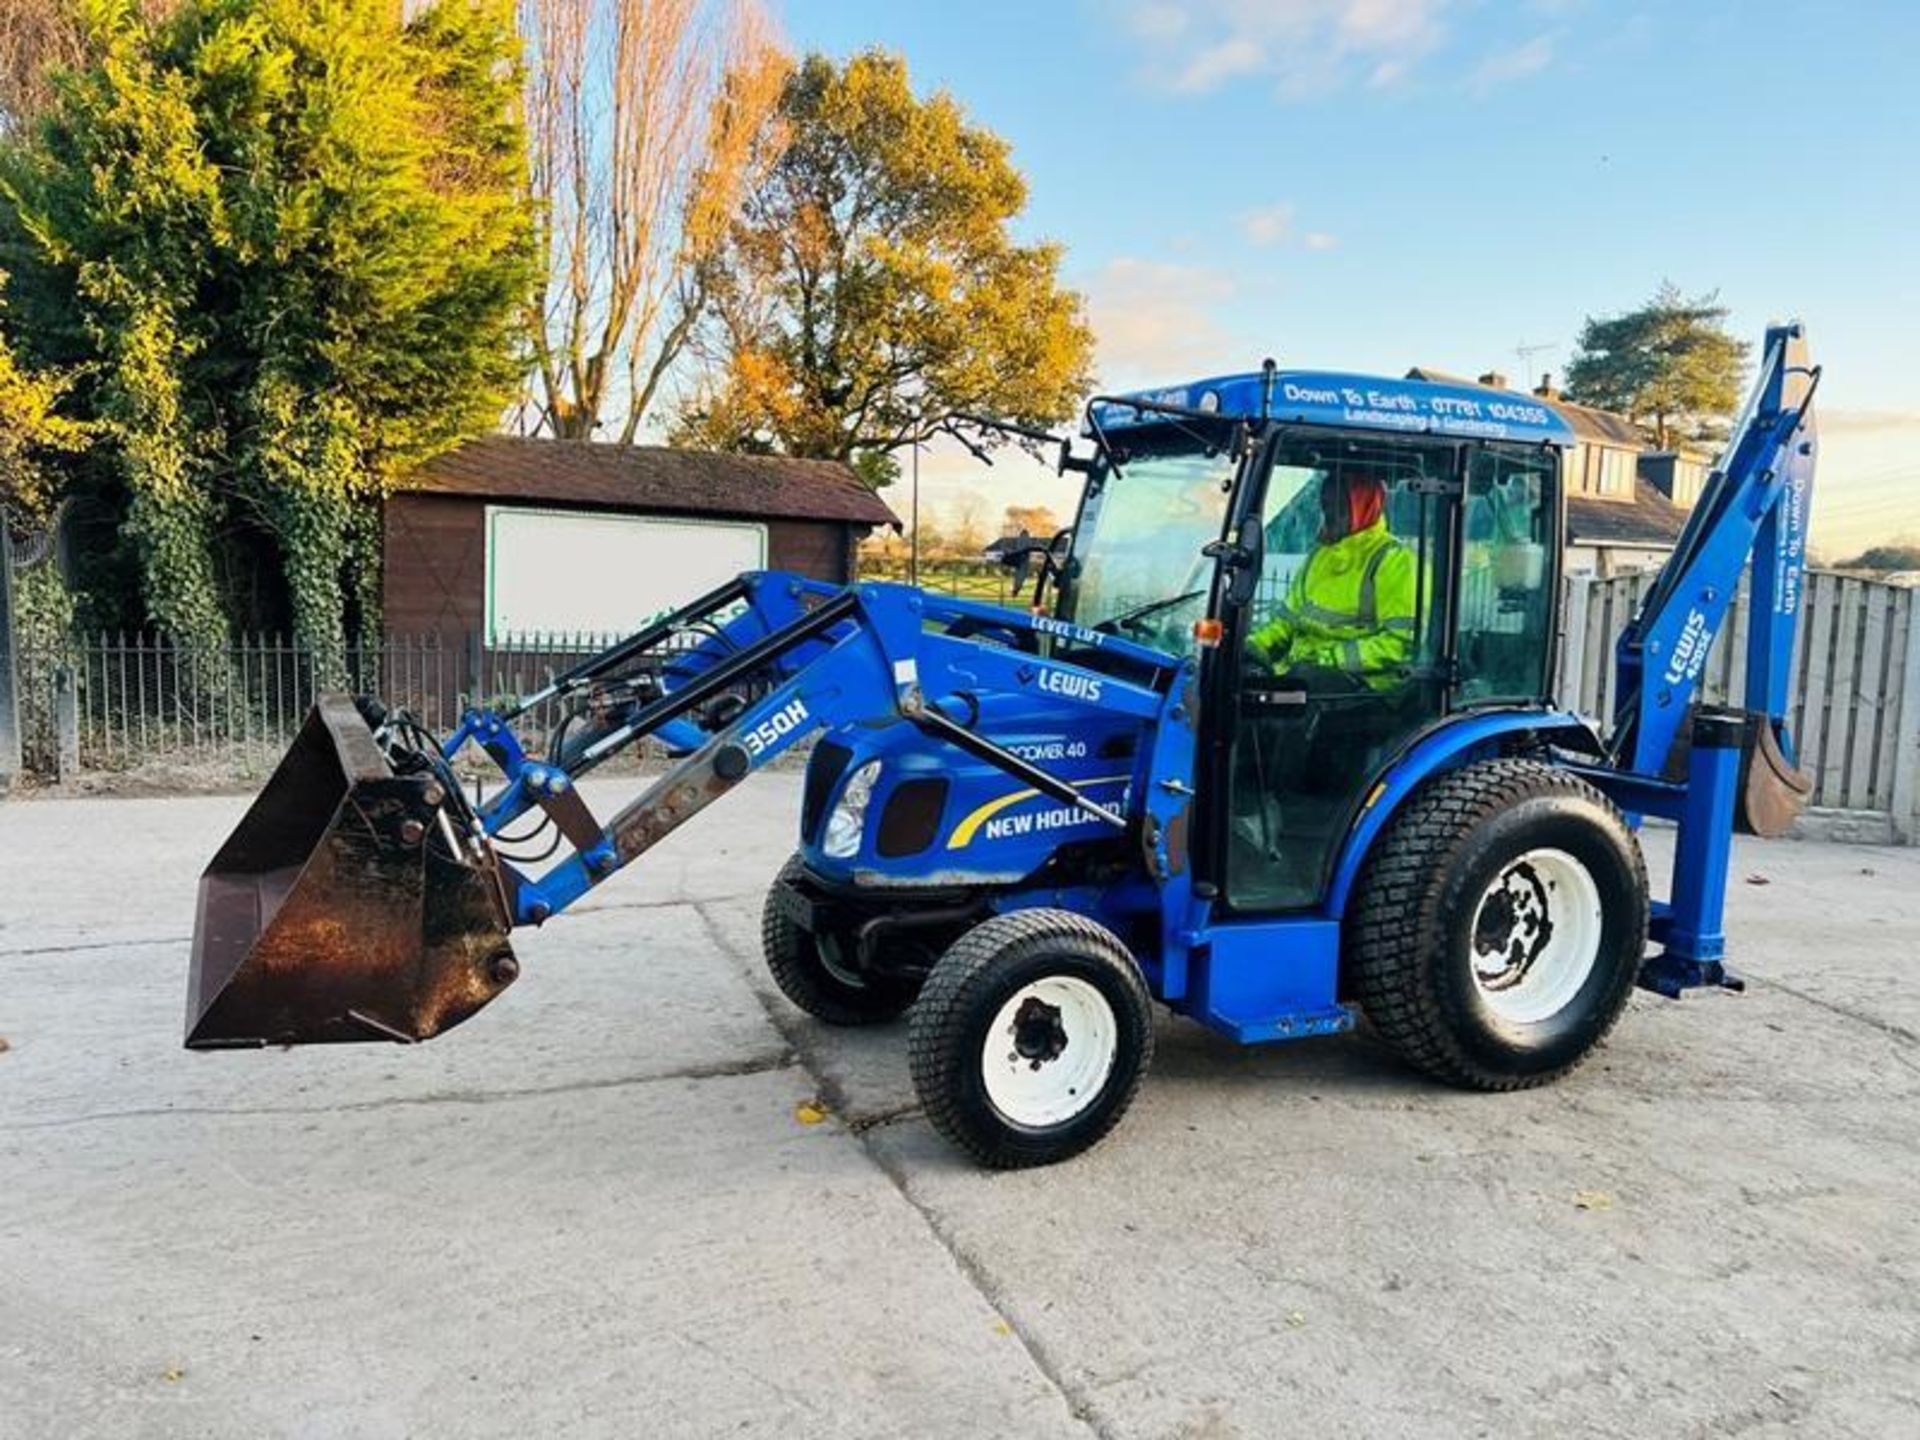 NEW HOLLAND BOOMER 40 4WD TRACTOR *YEAR 2014, ONLY 737 HRS* C/W LOADER & BACK TACTOR - Image 17 of 19